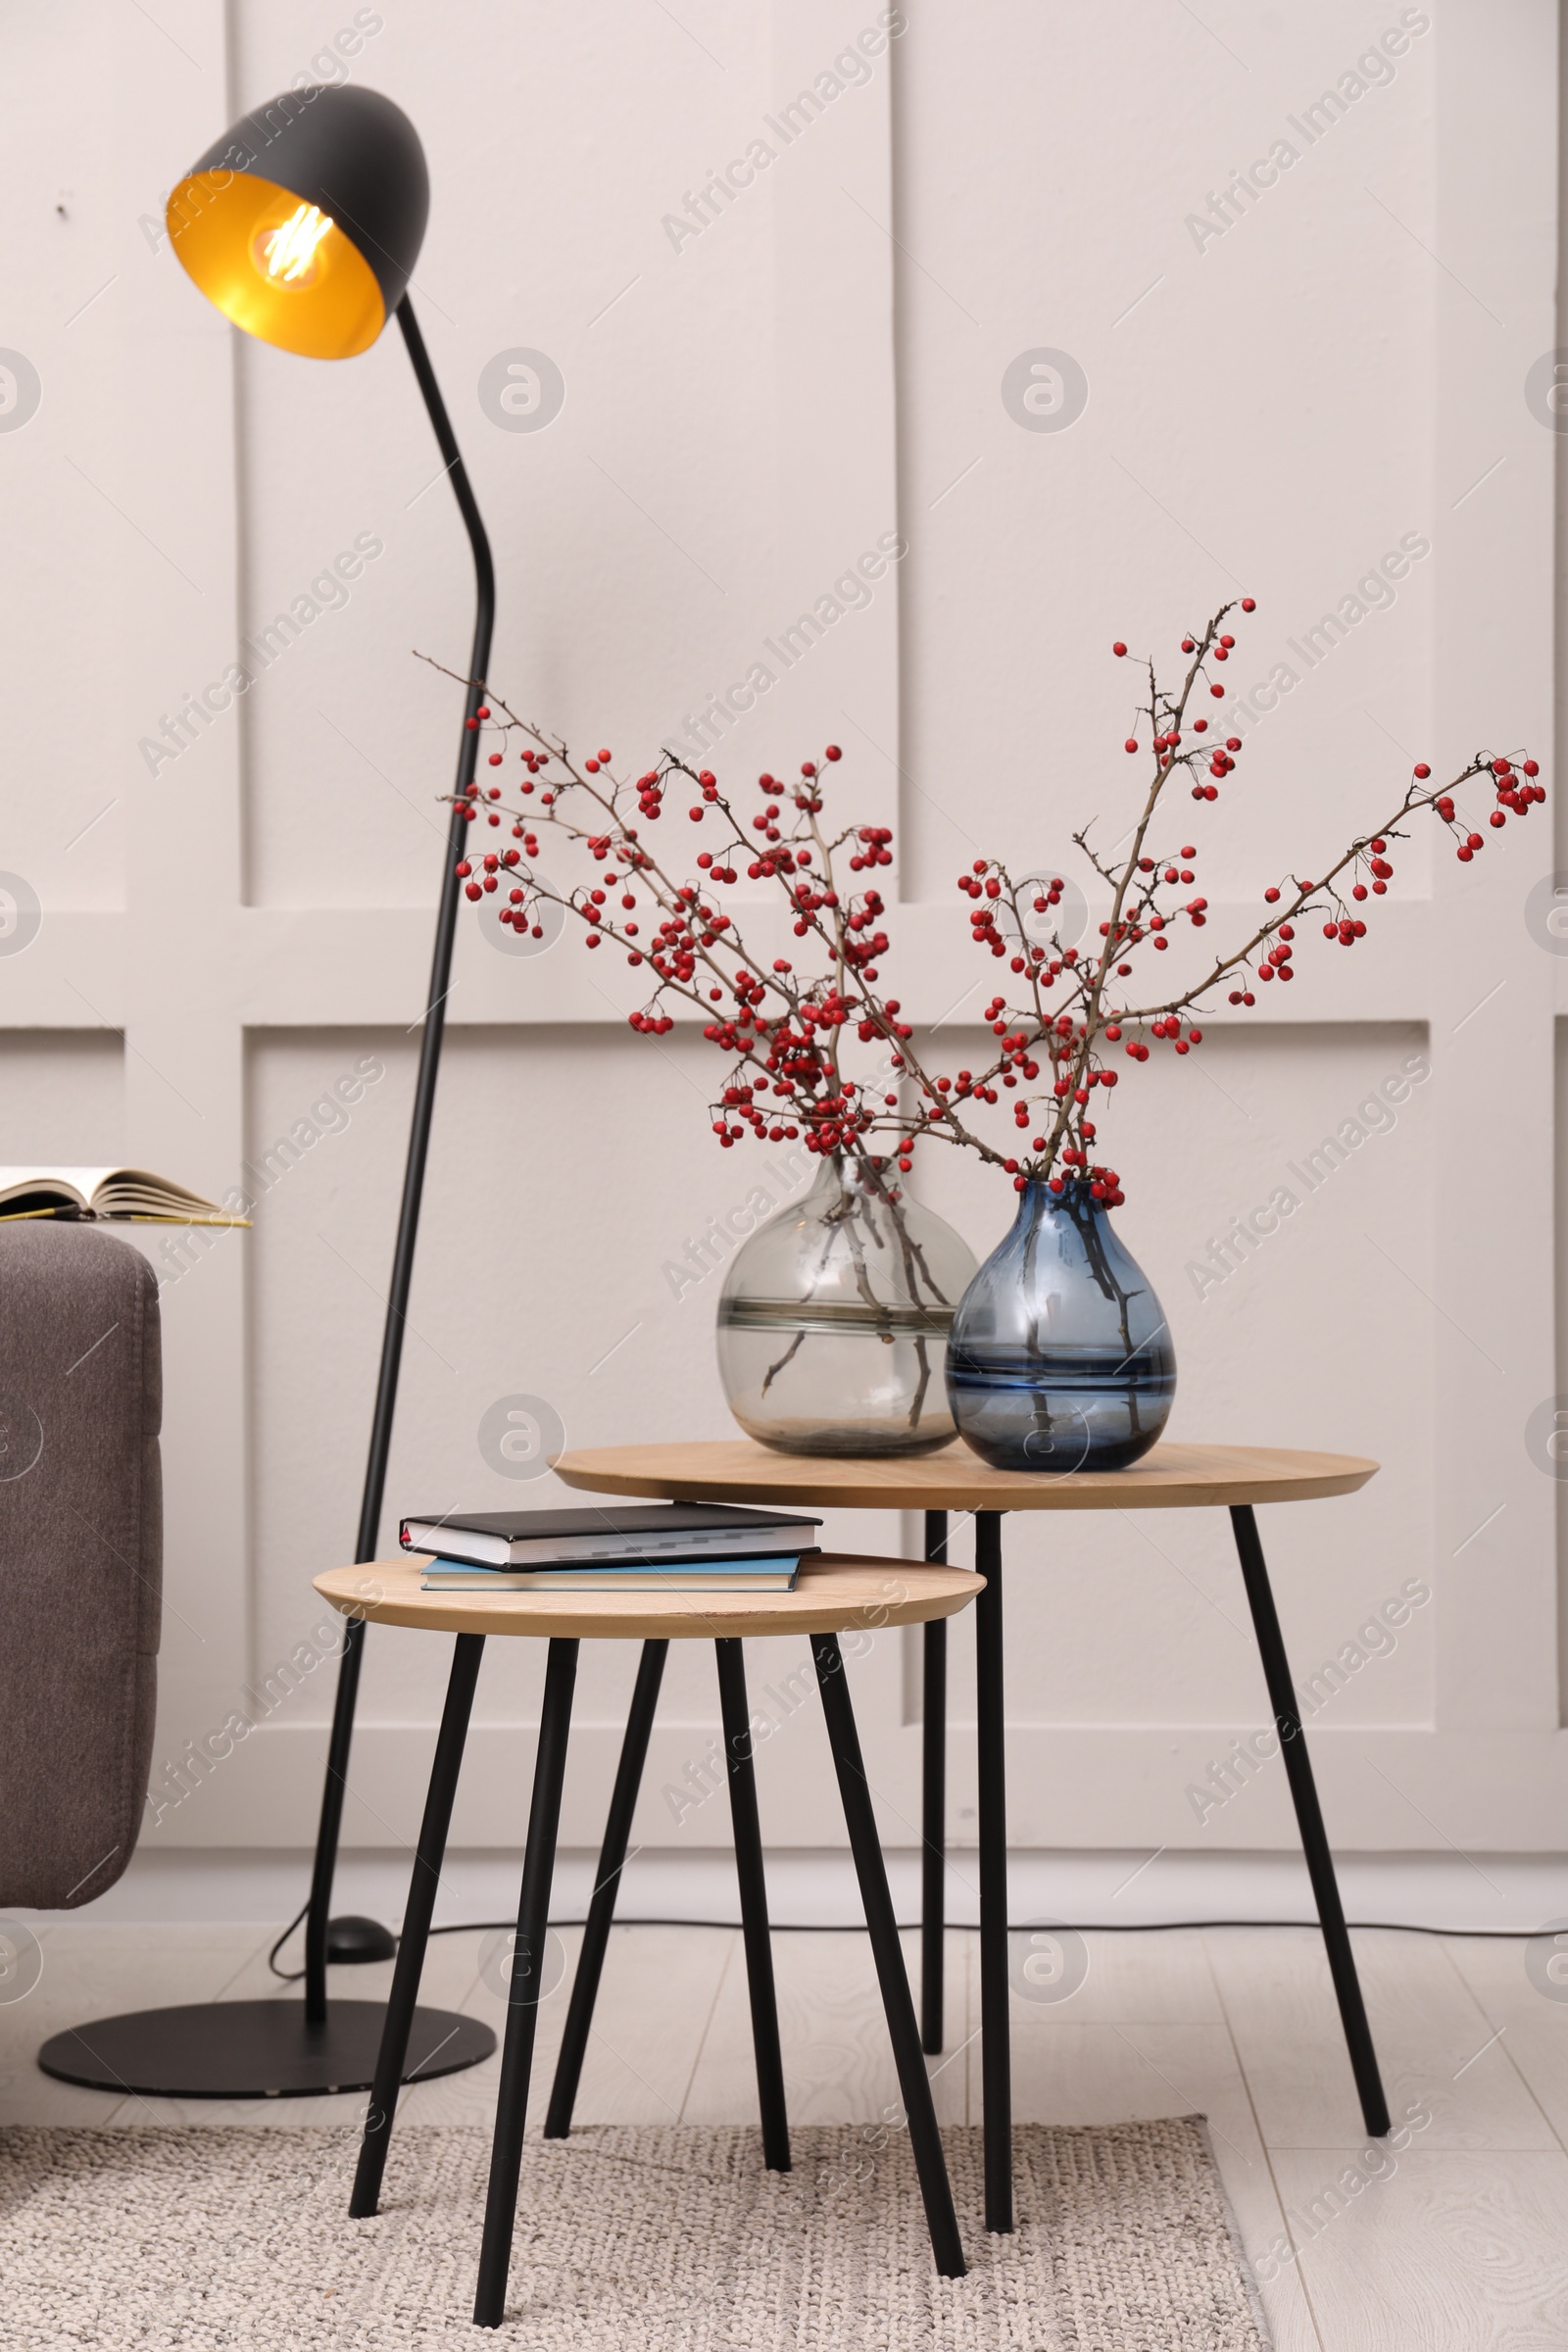 Photo of Hawthorn branches with red berries in vases and lamp near light wall indoors. Interior design